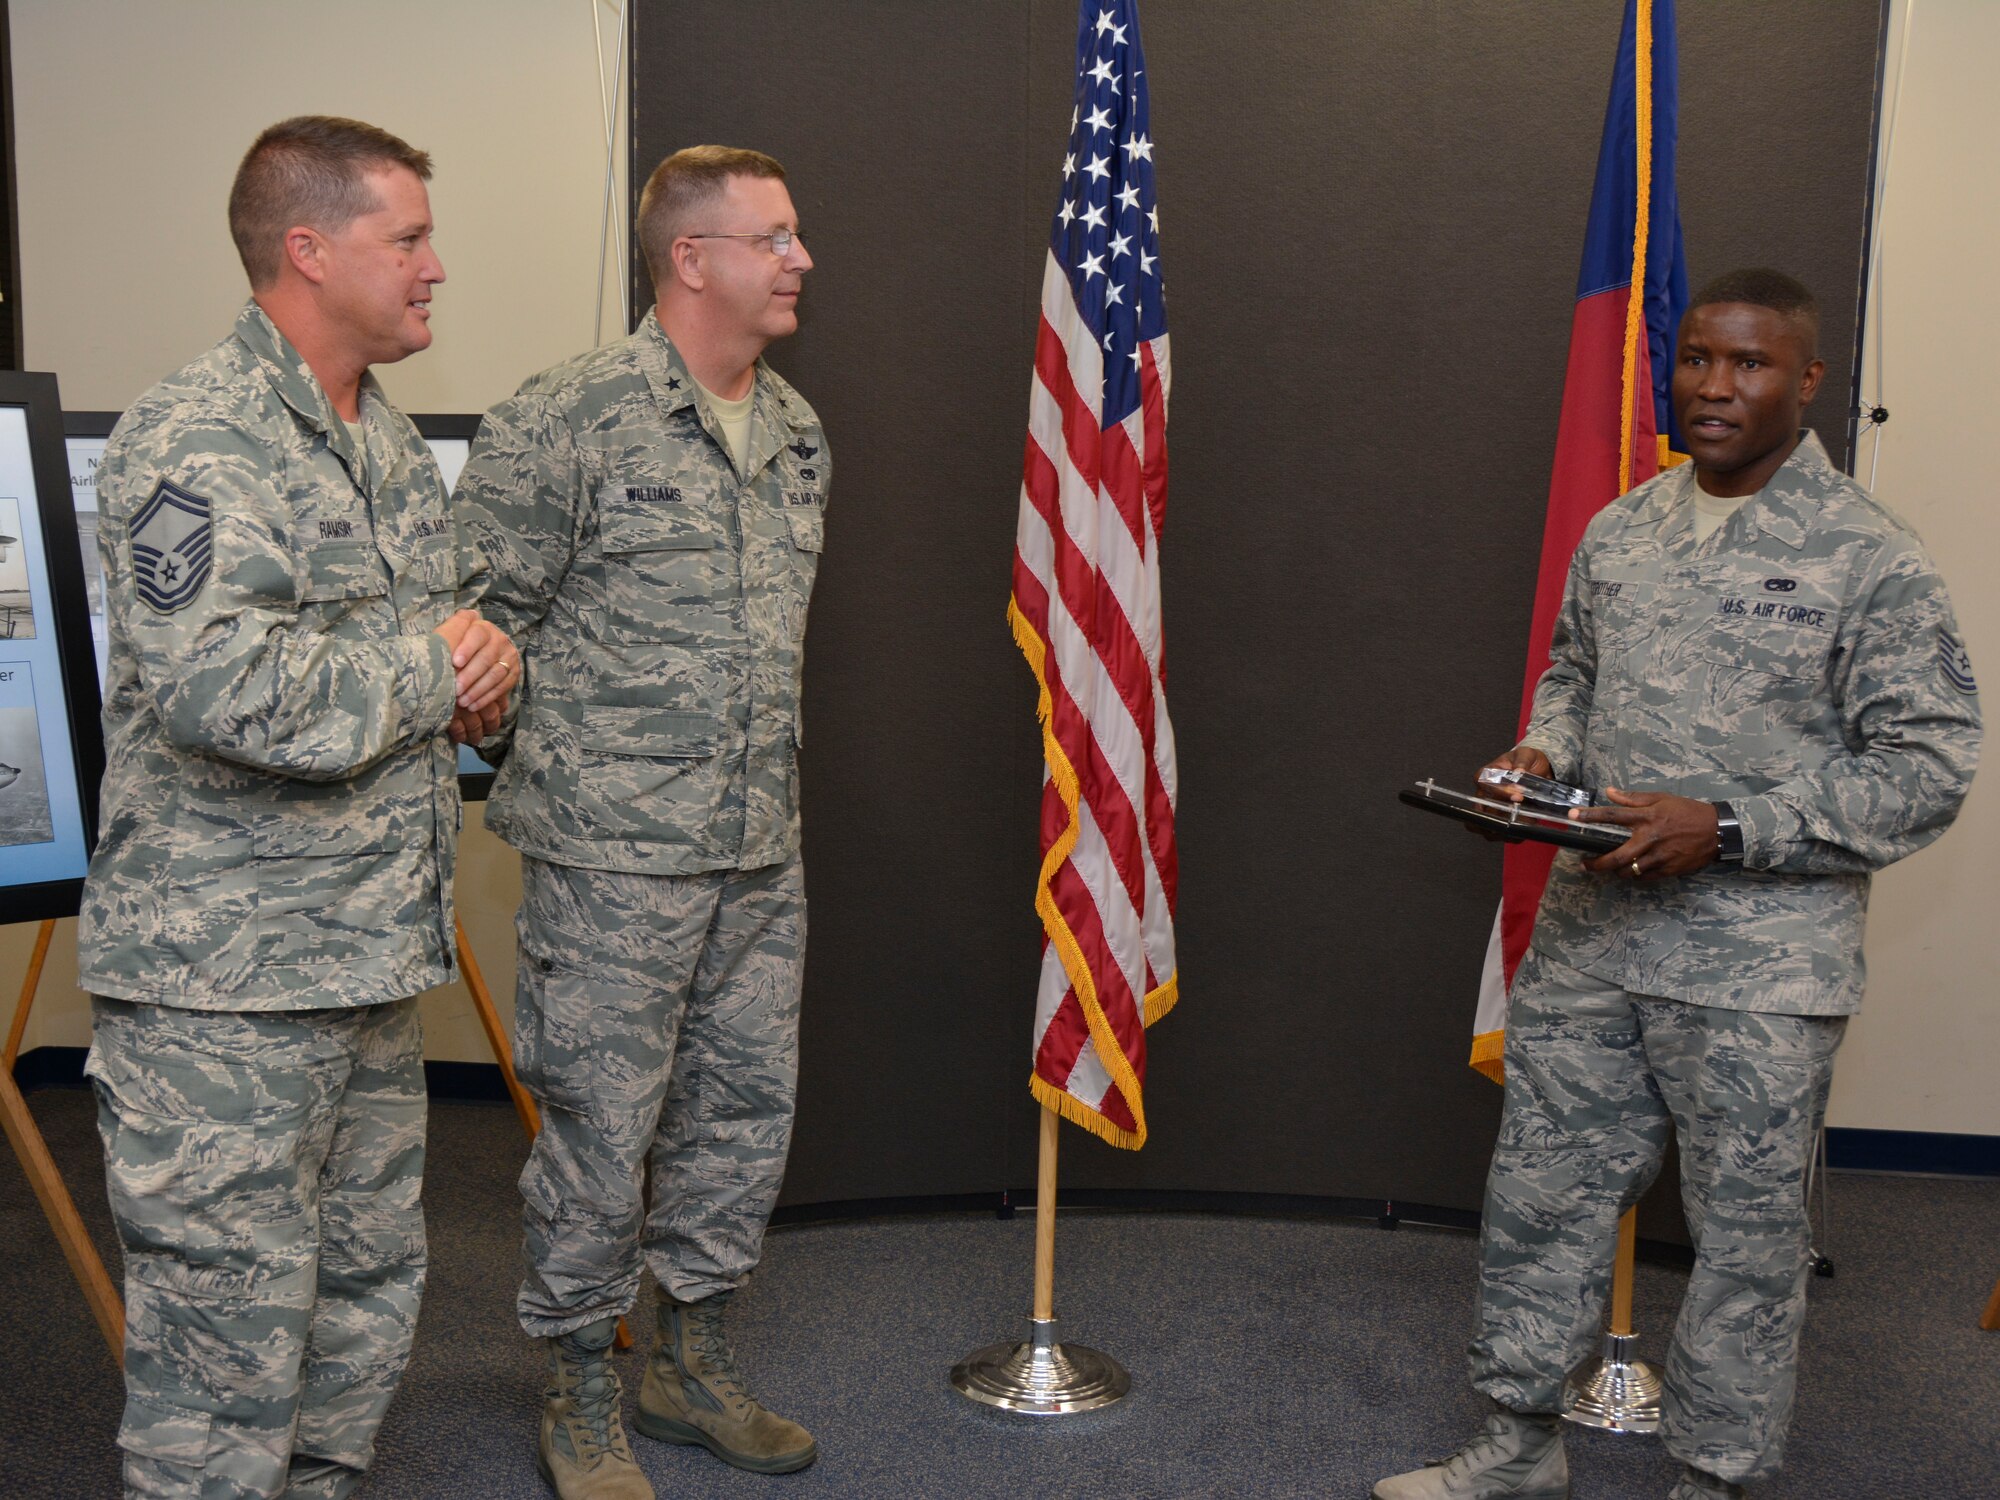 U.S. Air Force Tech. Sgt. Francis Strother (right), 145th Force Support Squadron, is presented a Regional Golden Eagle Award for top overall accessions in 2014 from Brig. Gen. Roger E. Williams, Jr. (center), Assistant Adjutant General for Air, North Carolina Air National Guard, as Senior Master Sgt. Robert Ramsay, (left) Recruiting and Retention Superintendent, looks on during a ceremony held at the North Carolina Air National Guard base, Charlotte Douglas International Airport, N.C., June 6, 2015. The 145th FSS recruiting and retention office won the team Regional Golden Eagle Award as well as seven individual awards. (U.S. Air National Guard photo by Senior Airman Laura Montgomery, 145th Public Affairs/Released)